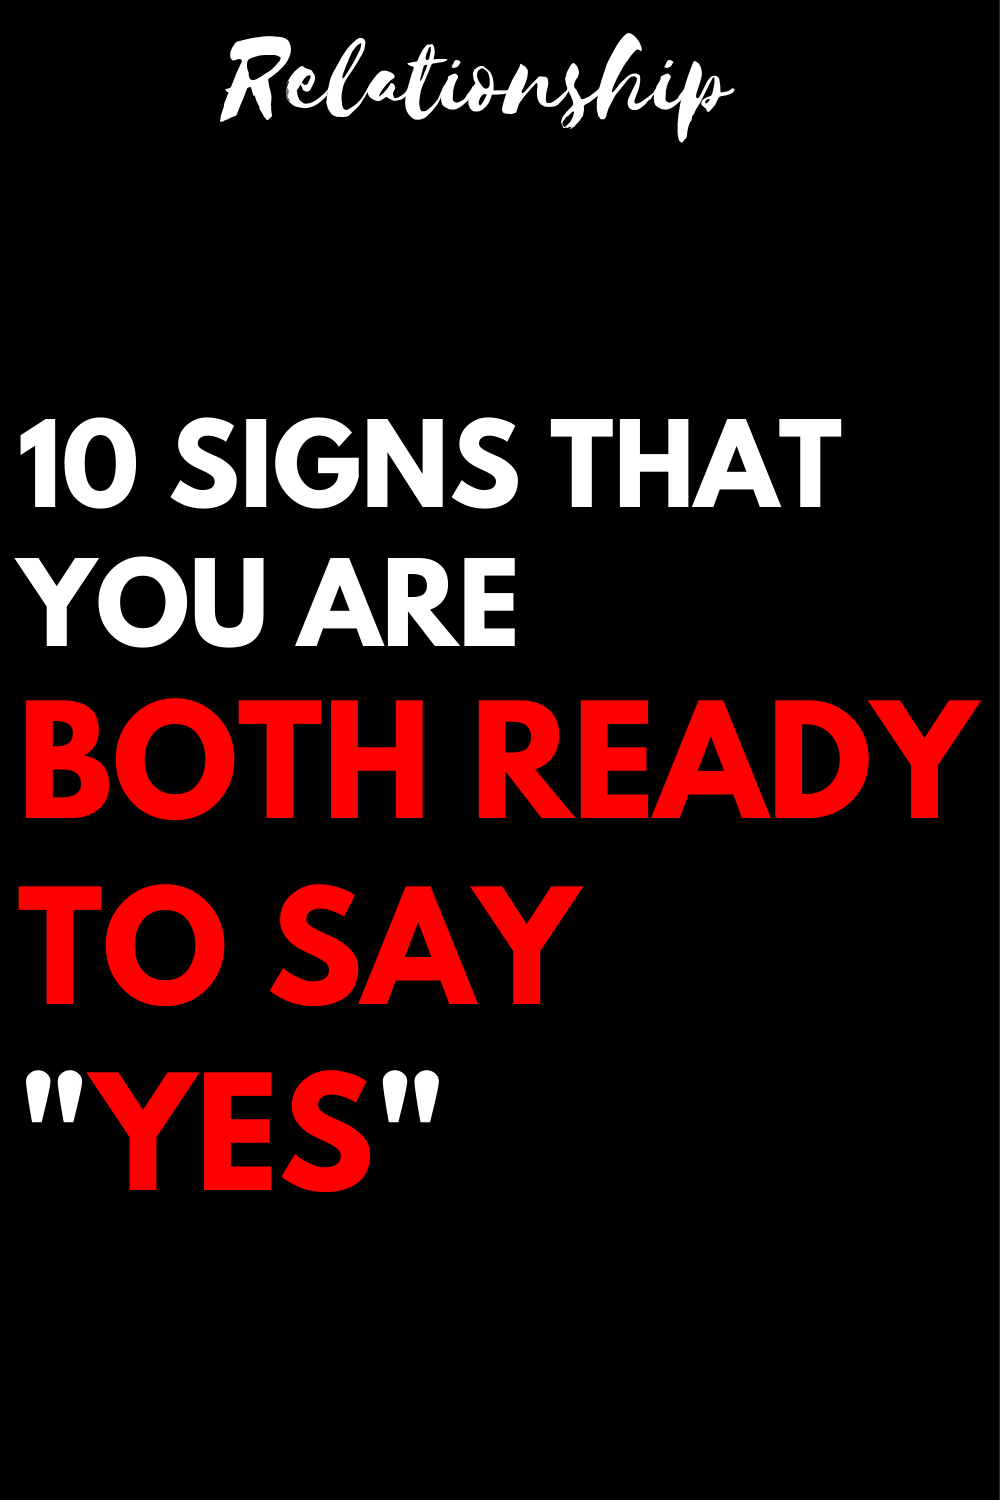 10 signs that you are both ready to say "YES"